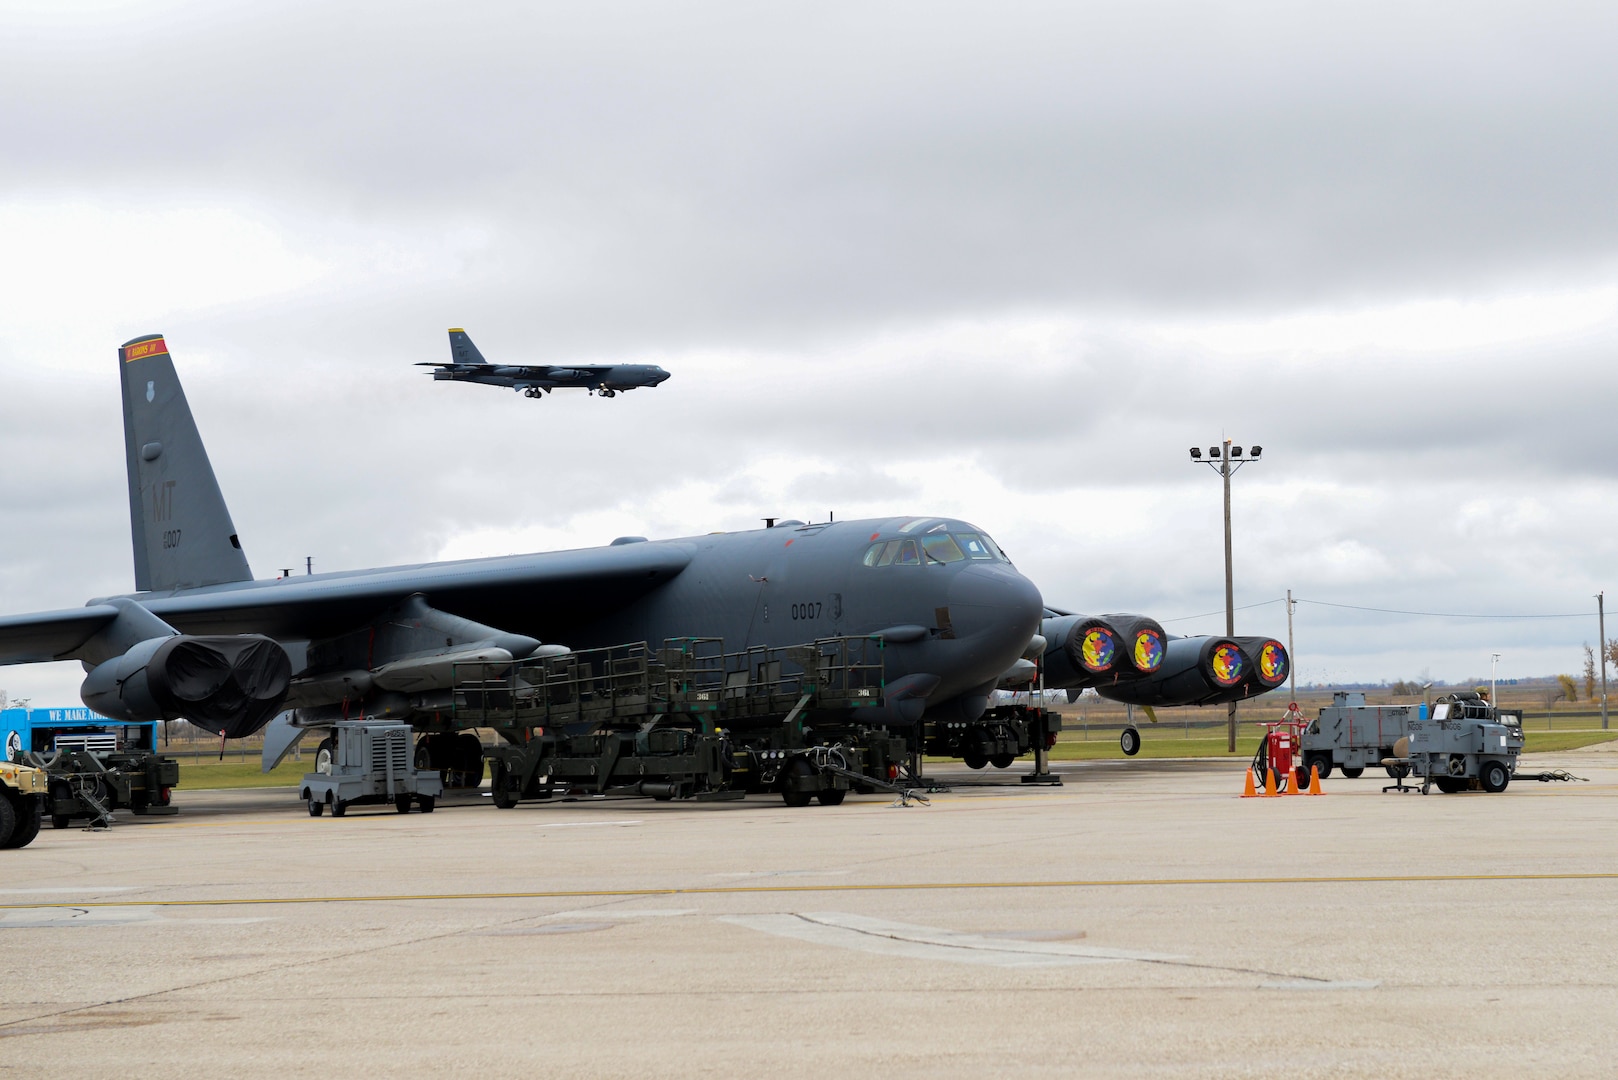 A B-52H Stratofortress, assigned to the 69th Bomb squadron, lands on the flight line during Exercise Prairie Vigilance 23-1 at Minot Air Force Base, North Dakota, Oct. 23, 2023. Prairie Vigilance promotes resilience, innovation, competitiveness and process improvement, all talents required to address the complex issues of today. (U.S. Air Force photo by Airman 1st Class Alyssa Bankston)